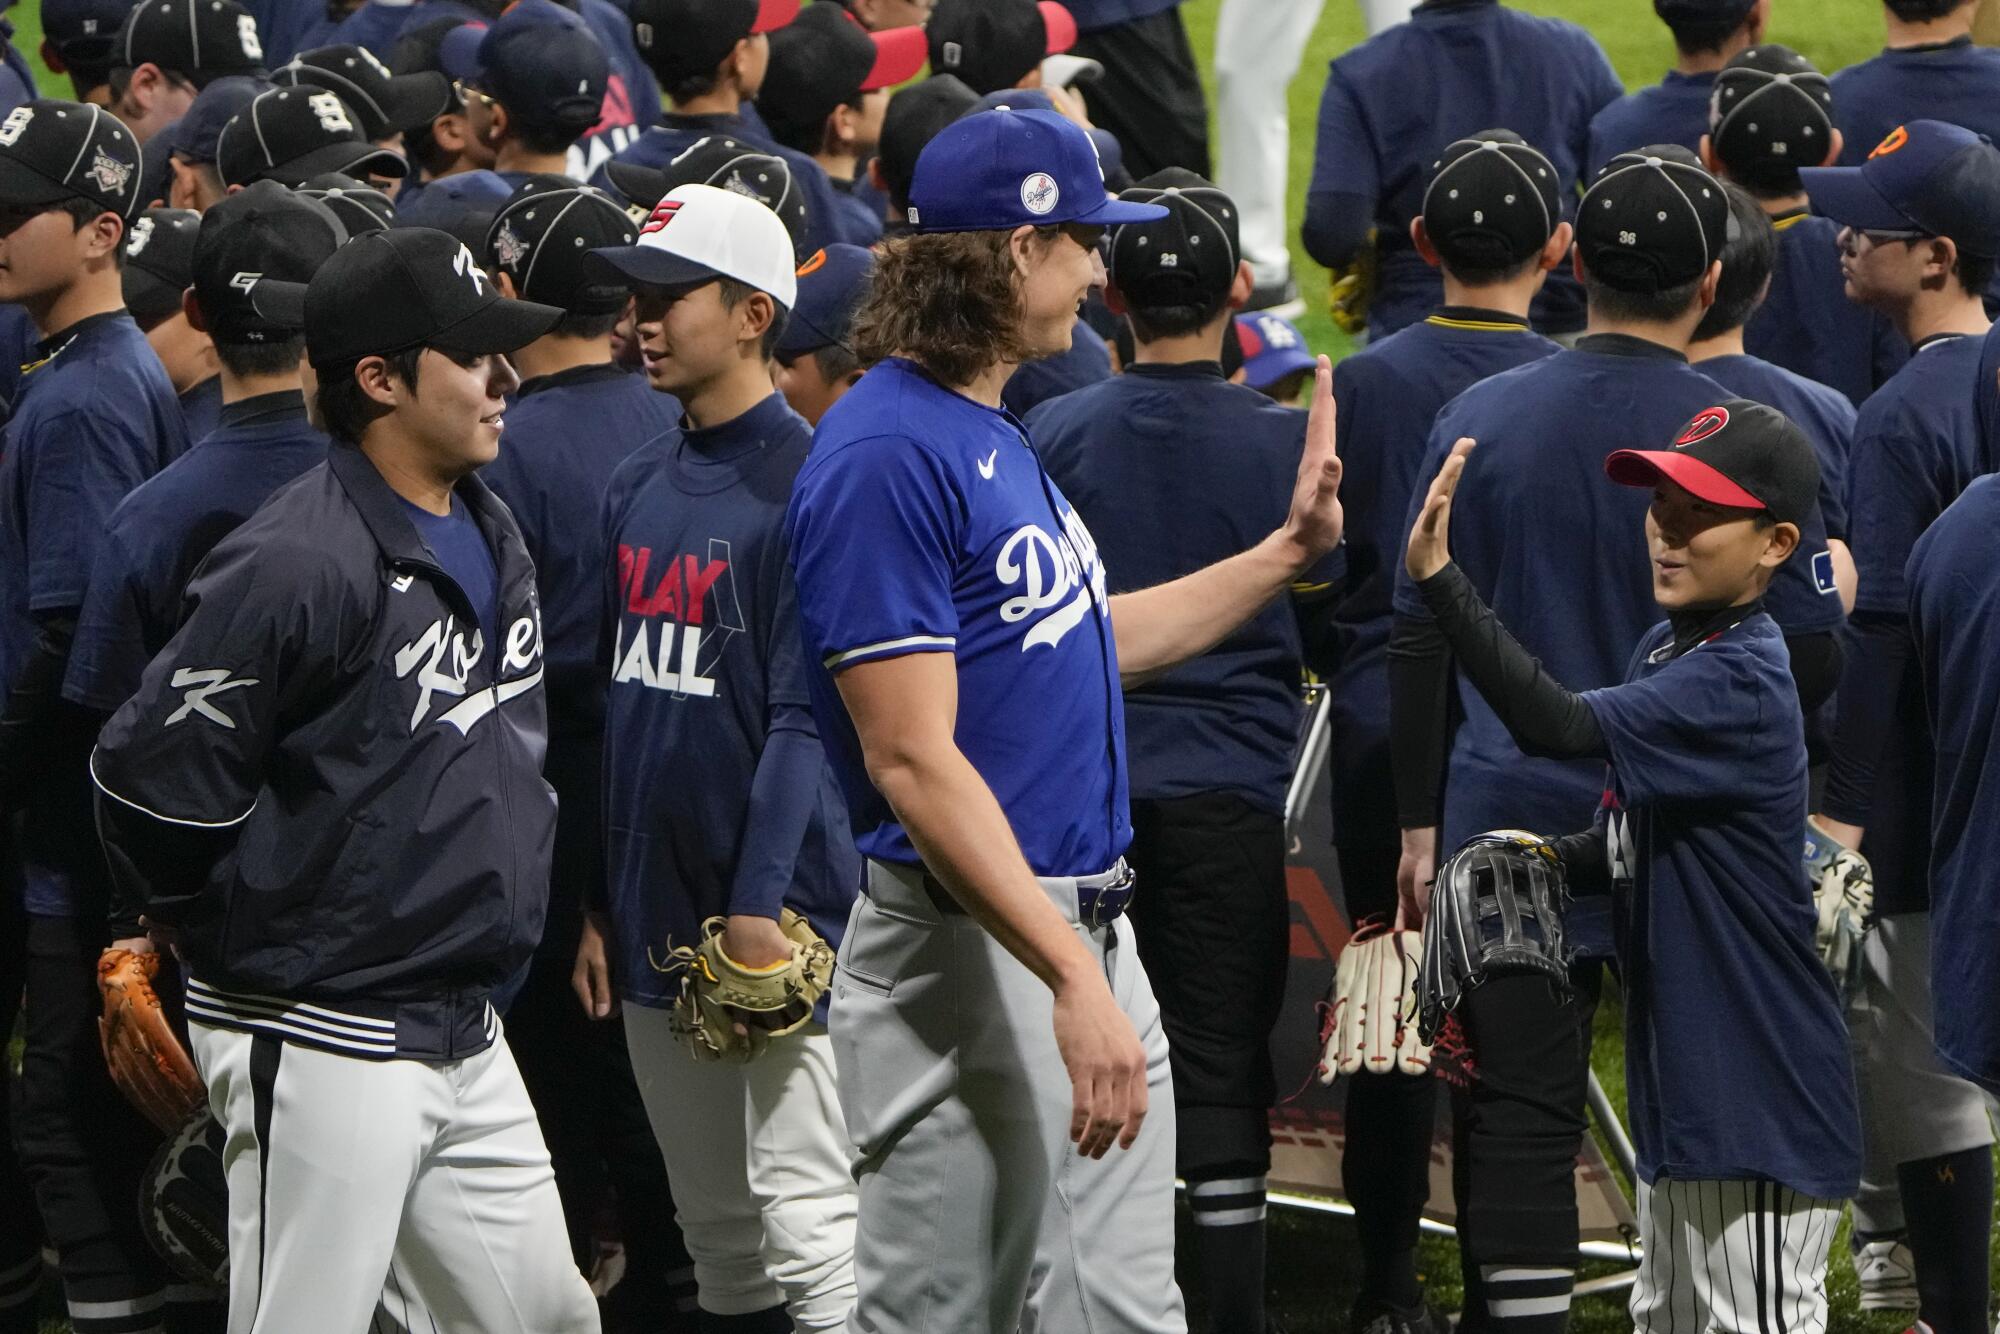 Tyler Glasnow, center, is greeted by a young fan during a skills clinic at Gocheok Sky Dome in Seoul on March 16.